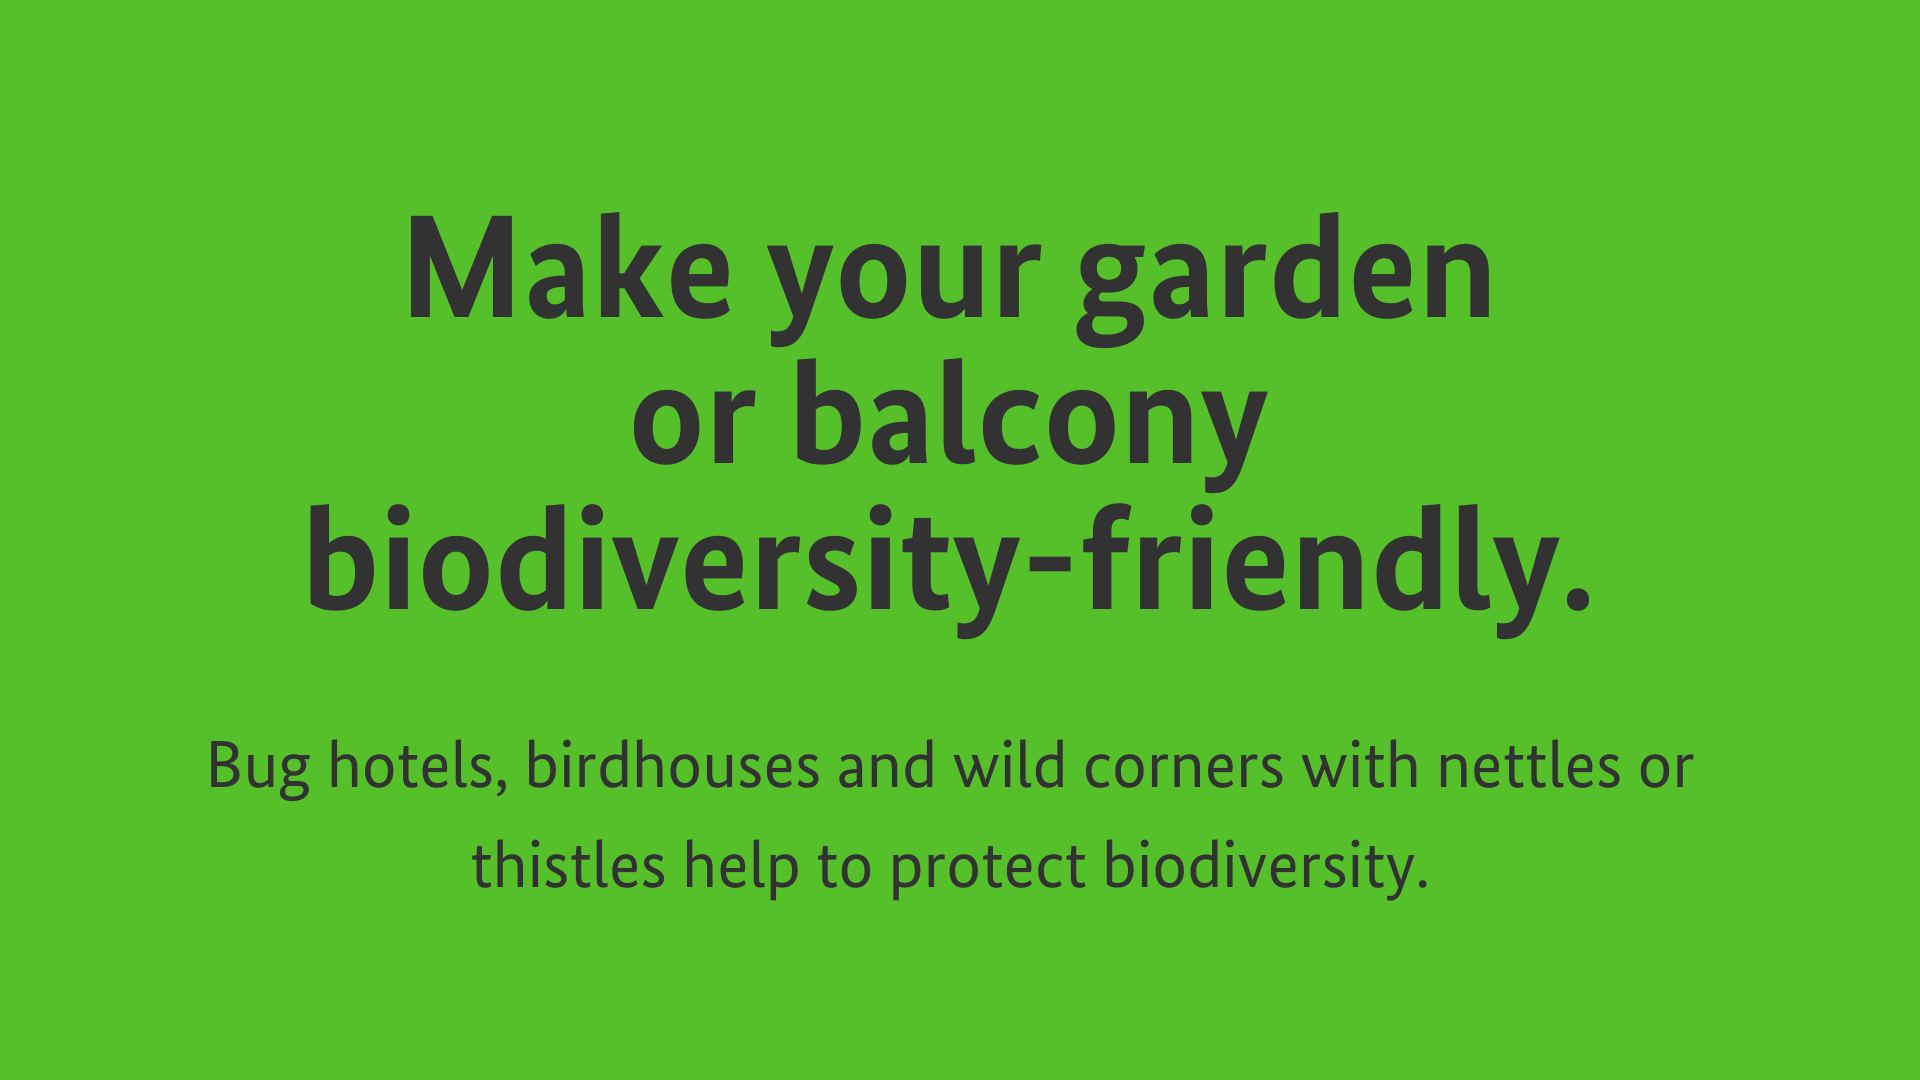 Make your garden or balcony biodiversity-friendly. Bug hotels, birdhouses and wild corners with nettles or thistles help to protect biodiversity.